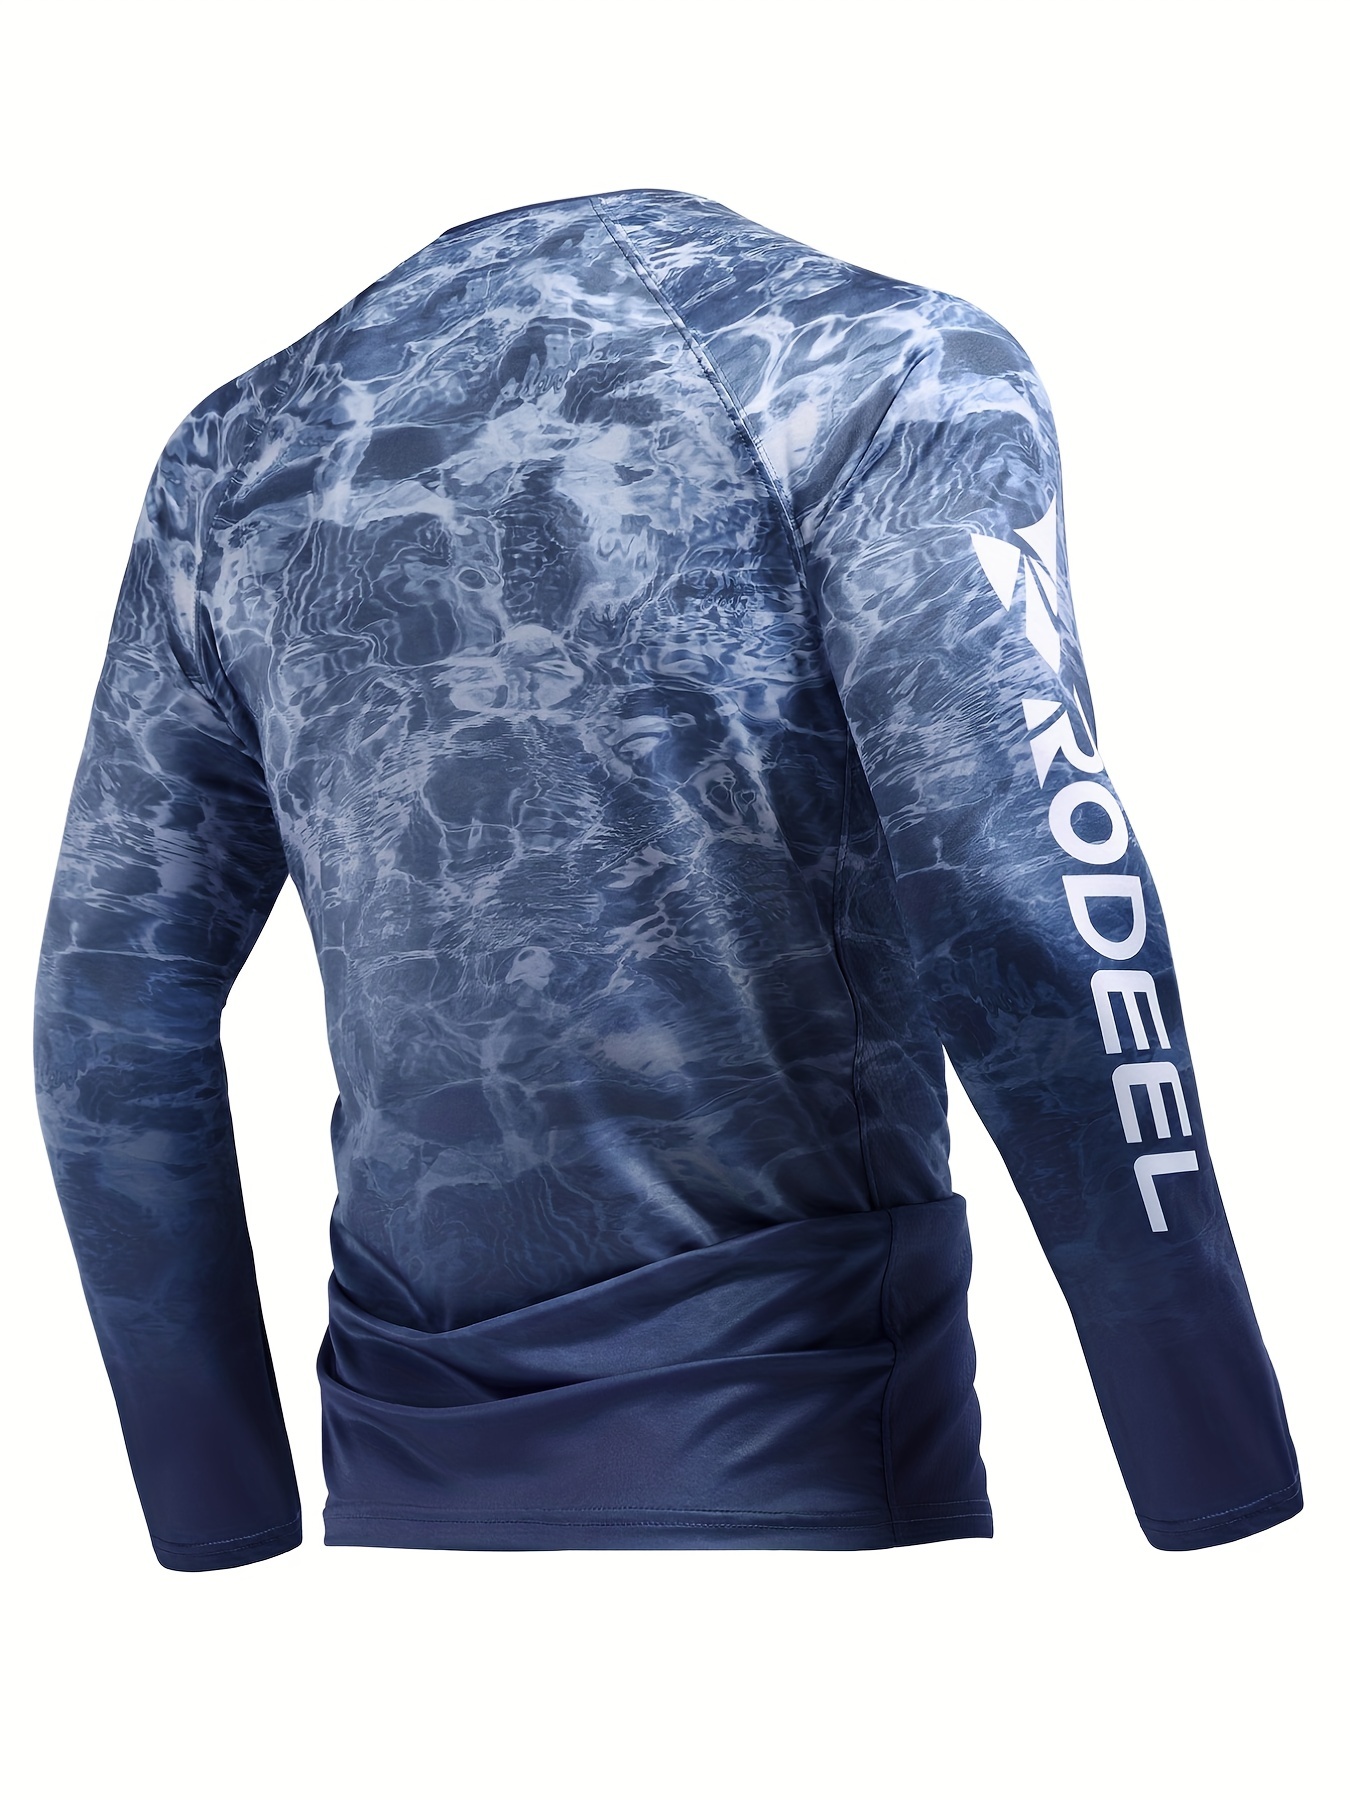 RODEEL Men's UPF 50+ Sun Protection Long Sleeve Hoodie Loose Fit Quick Dry Camo  Shirt For Fishing Running Hiking Outdoor Gym Clothes Men Spring Tops Basic  T Shirt